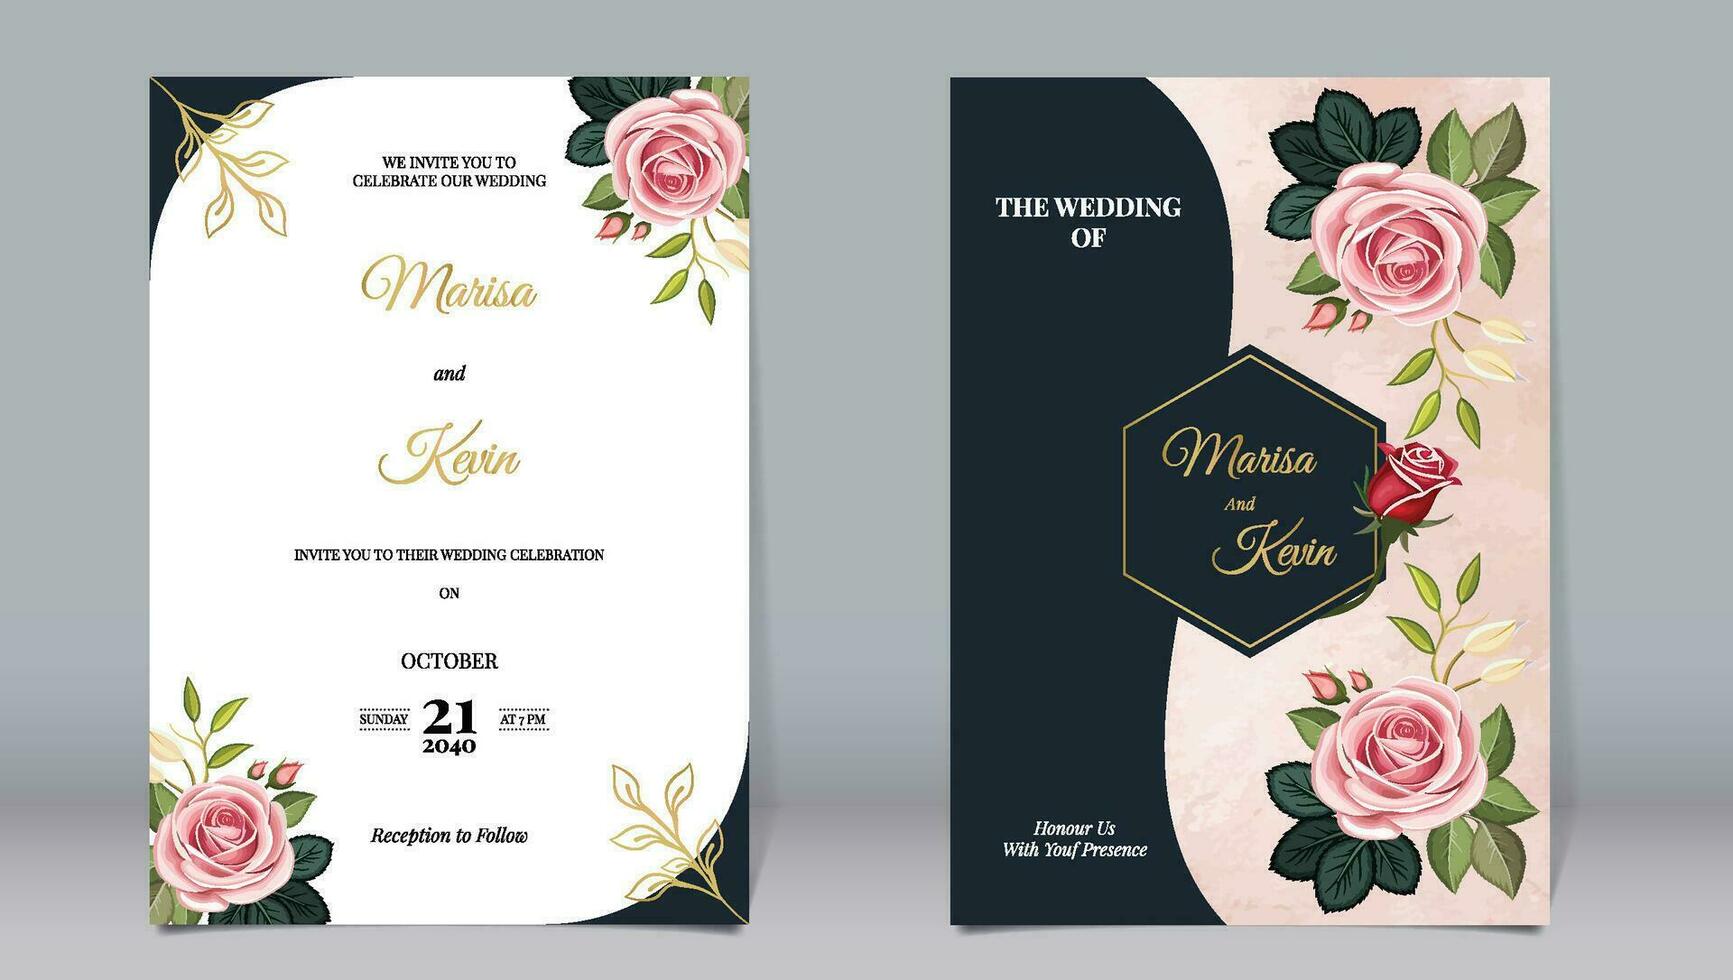 Luxury wedding invitation pink rose flowers and dark polygon elements decorate with watercolor background vector